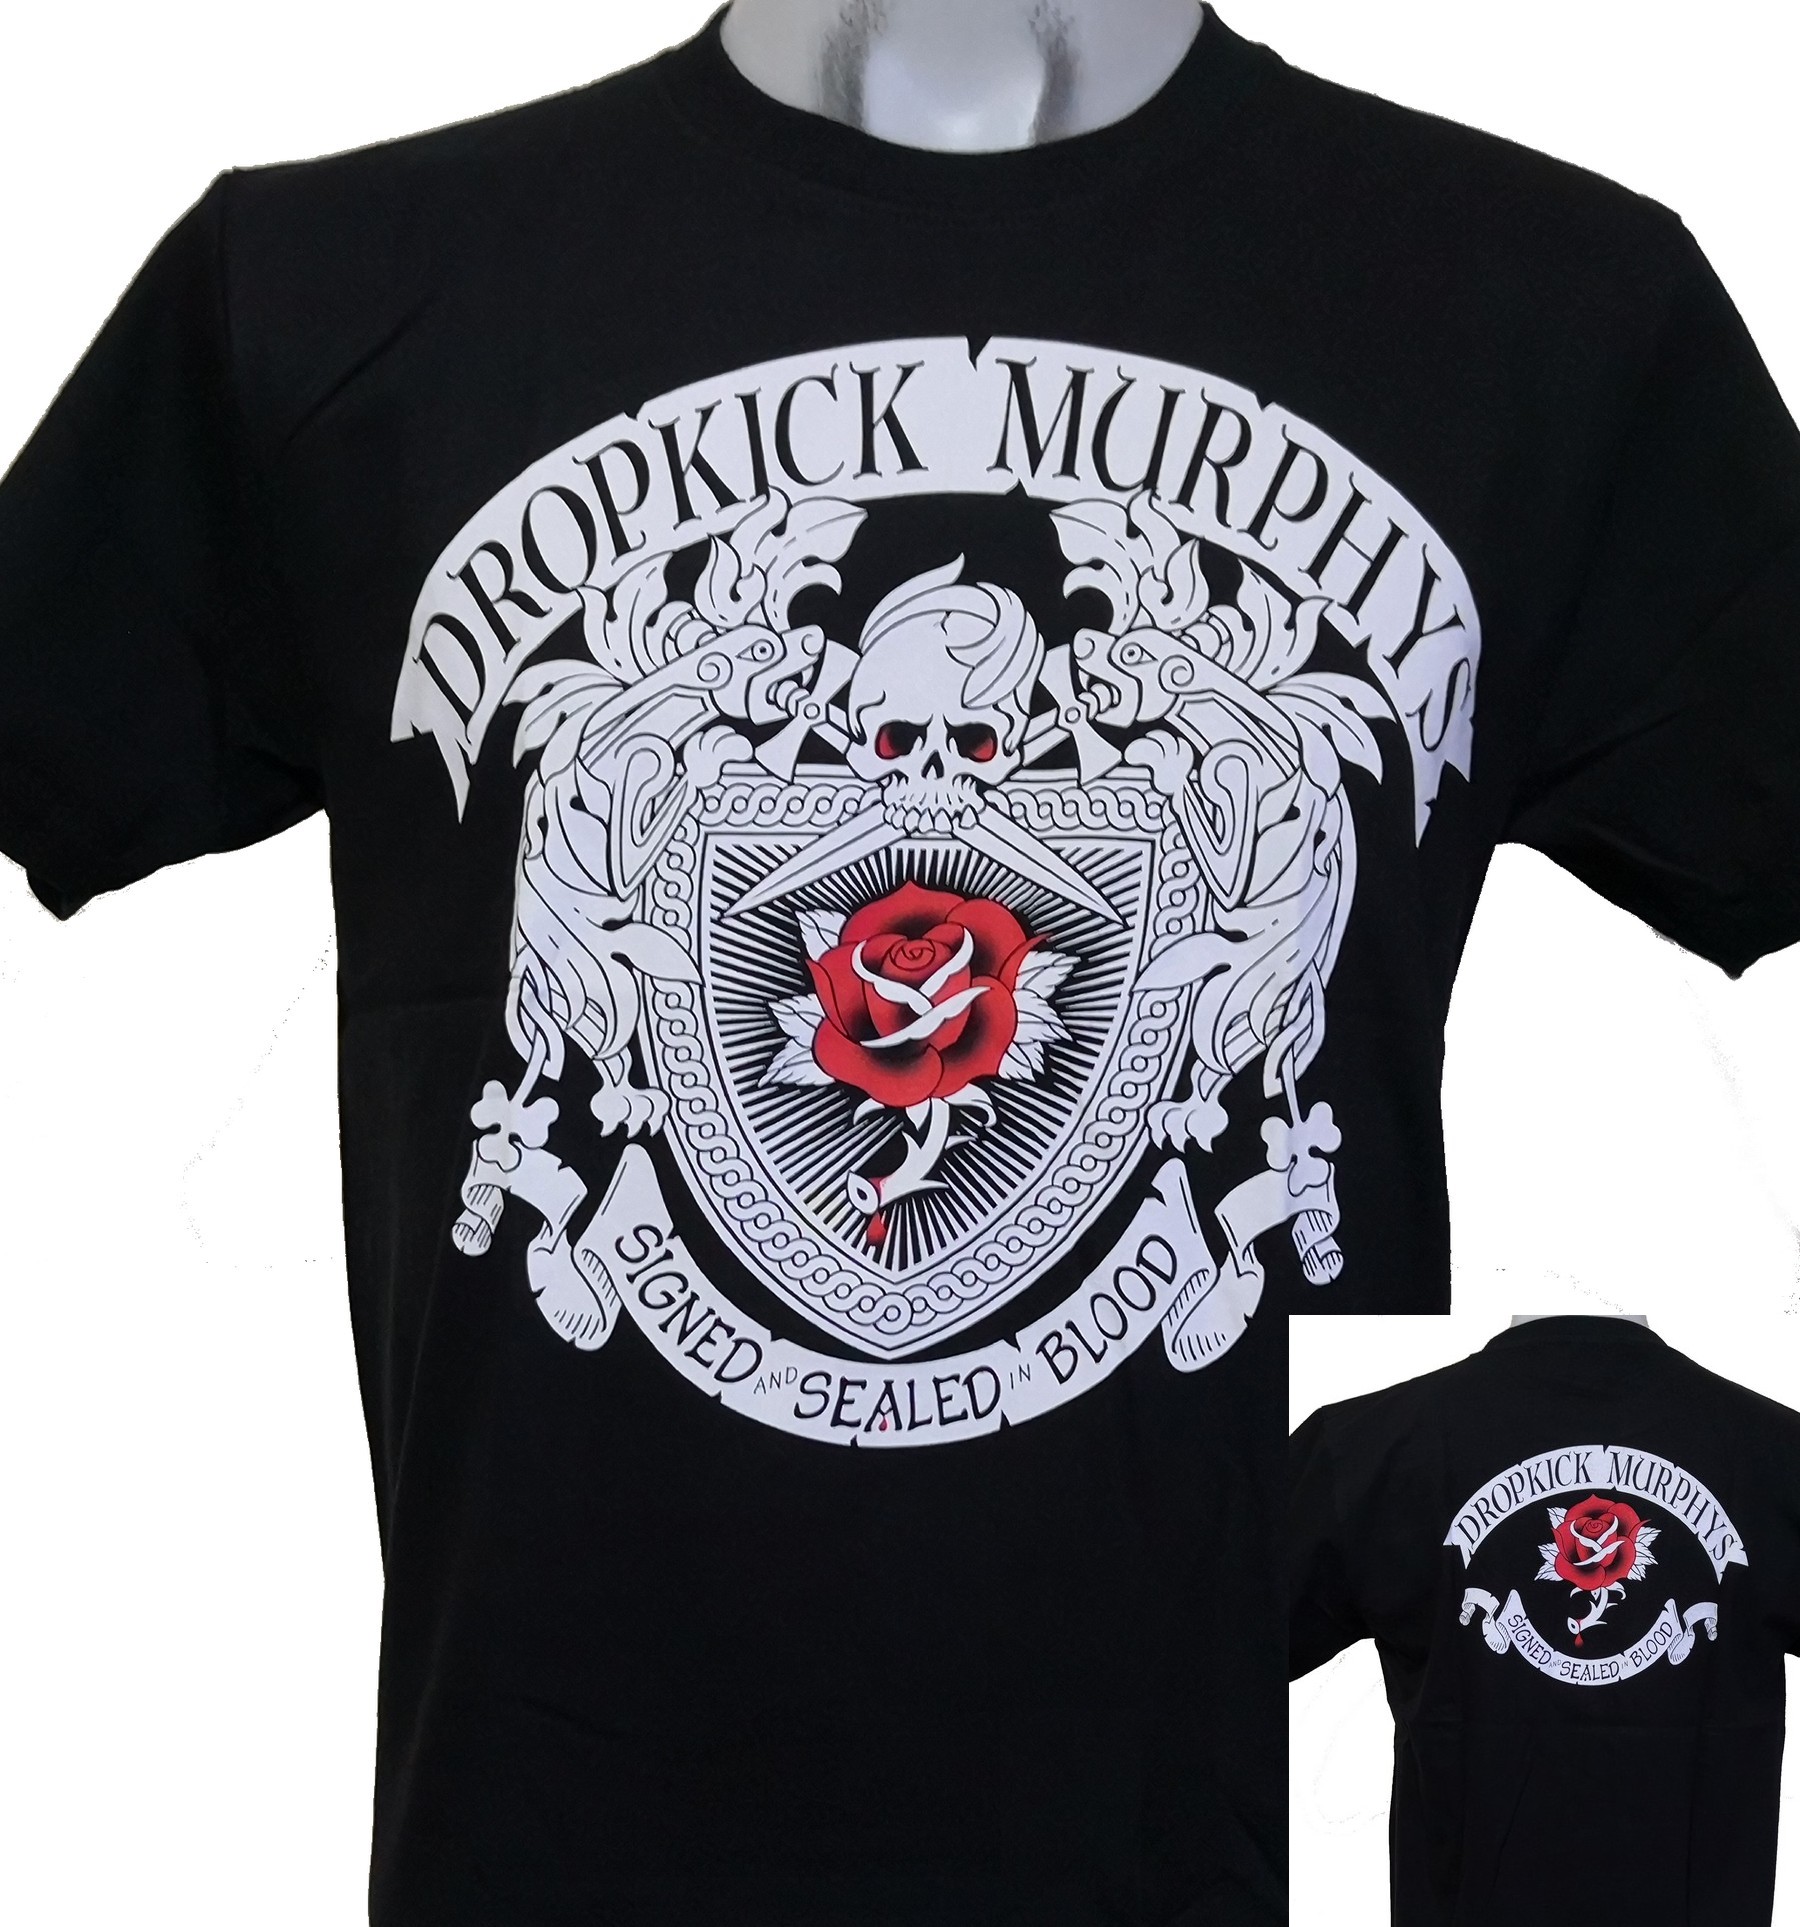 Dropkick Murphys t-shirt Signed and Sealed in Blood size XXL